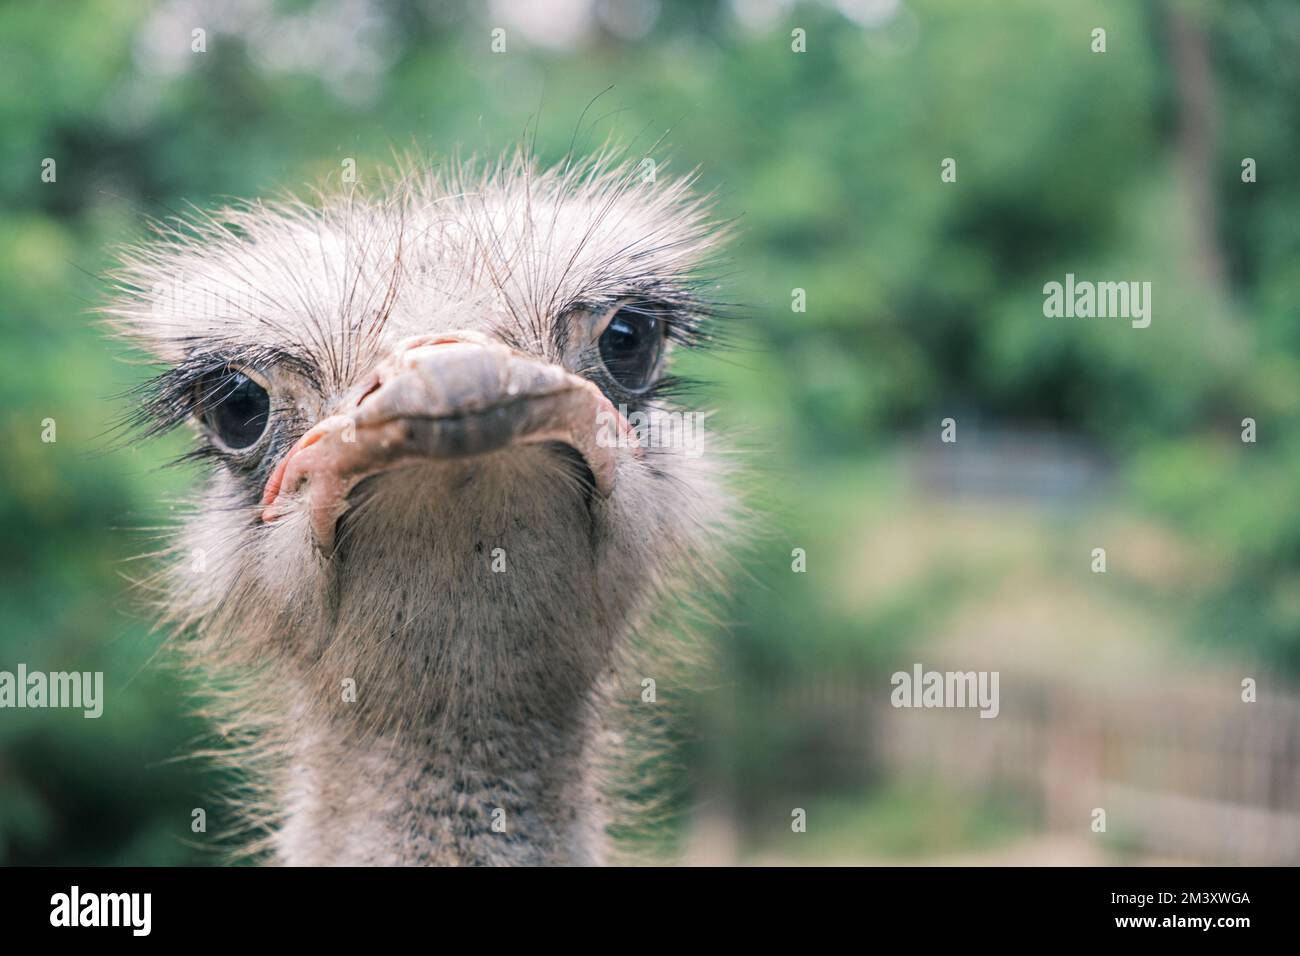 Portrait of an ostrich looking into the camera against the backdrop of greenery in the wild, close-up. Stock Photo